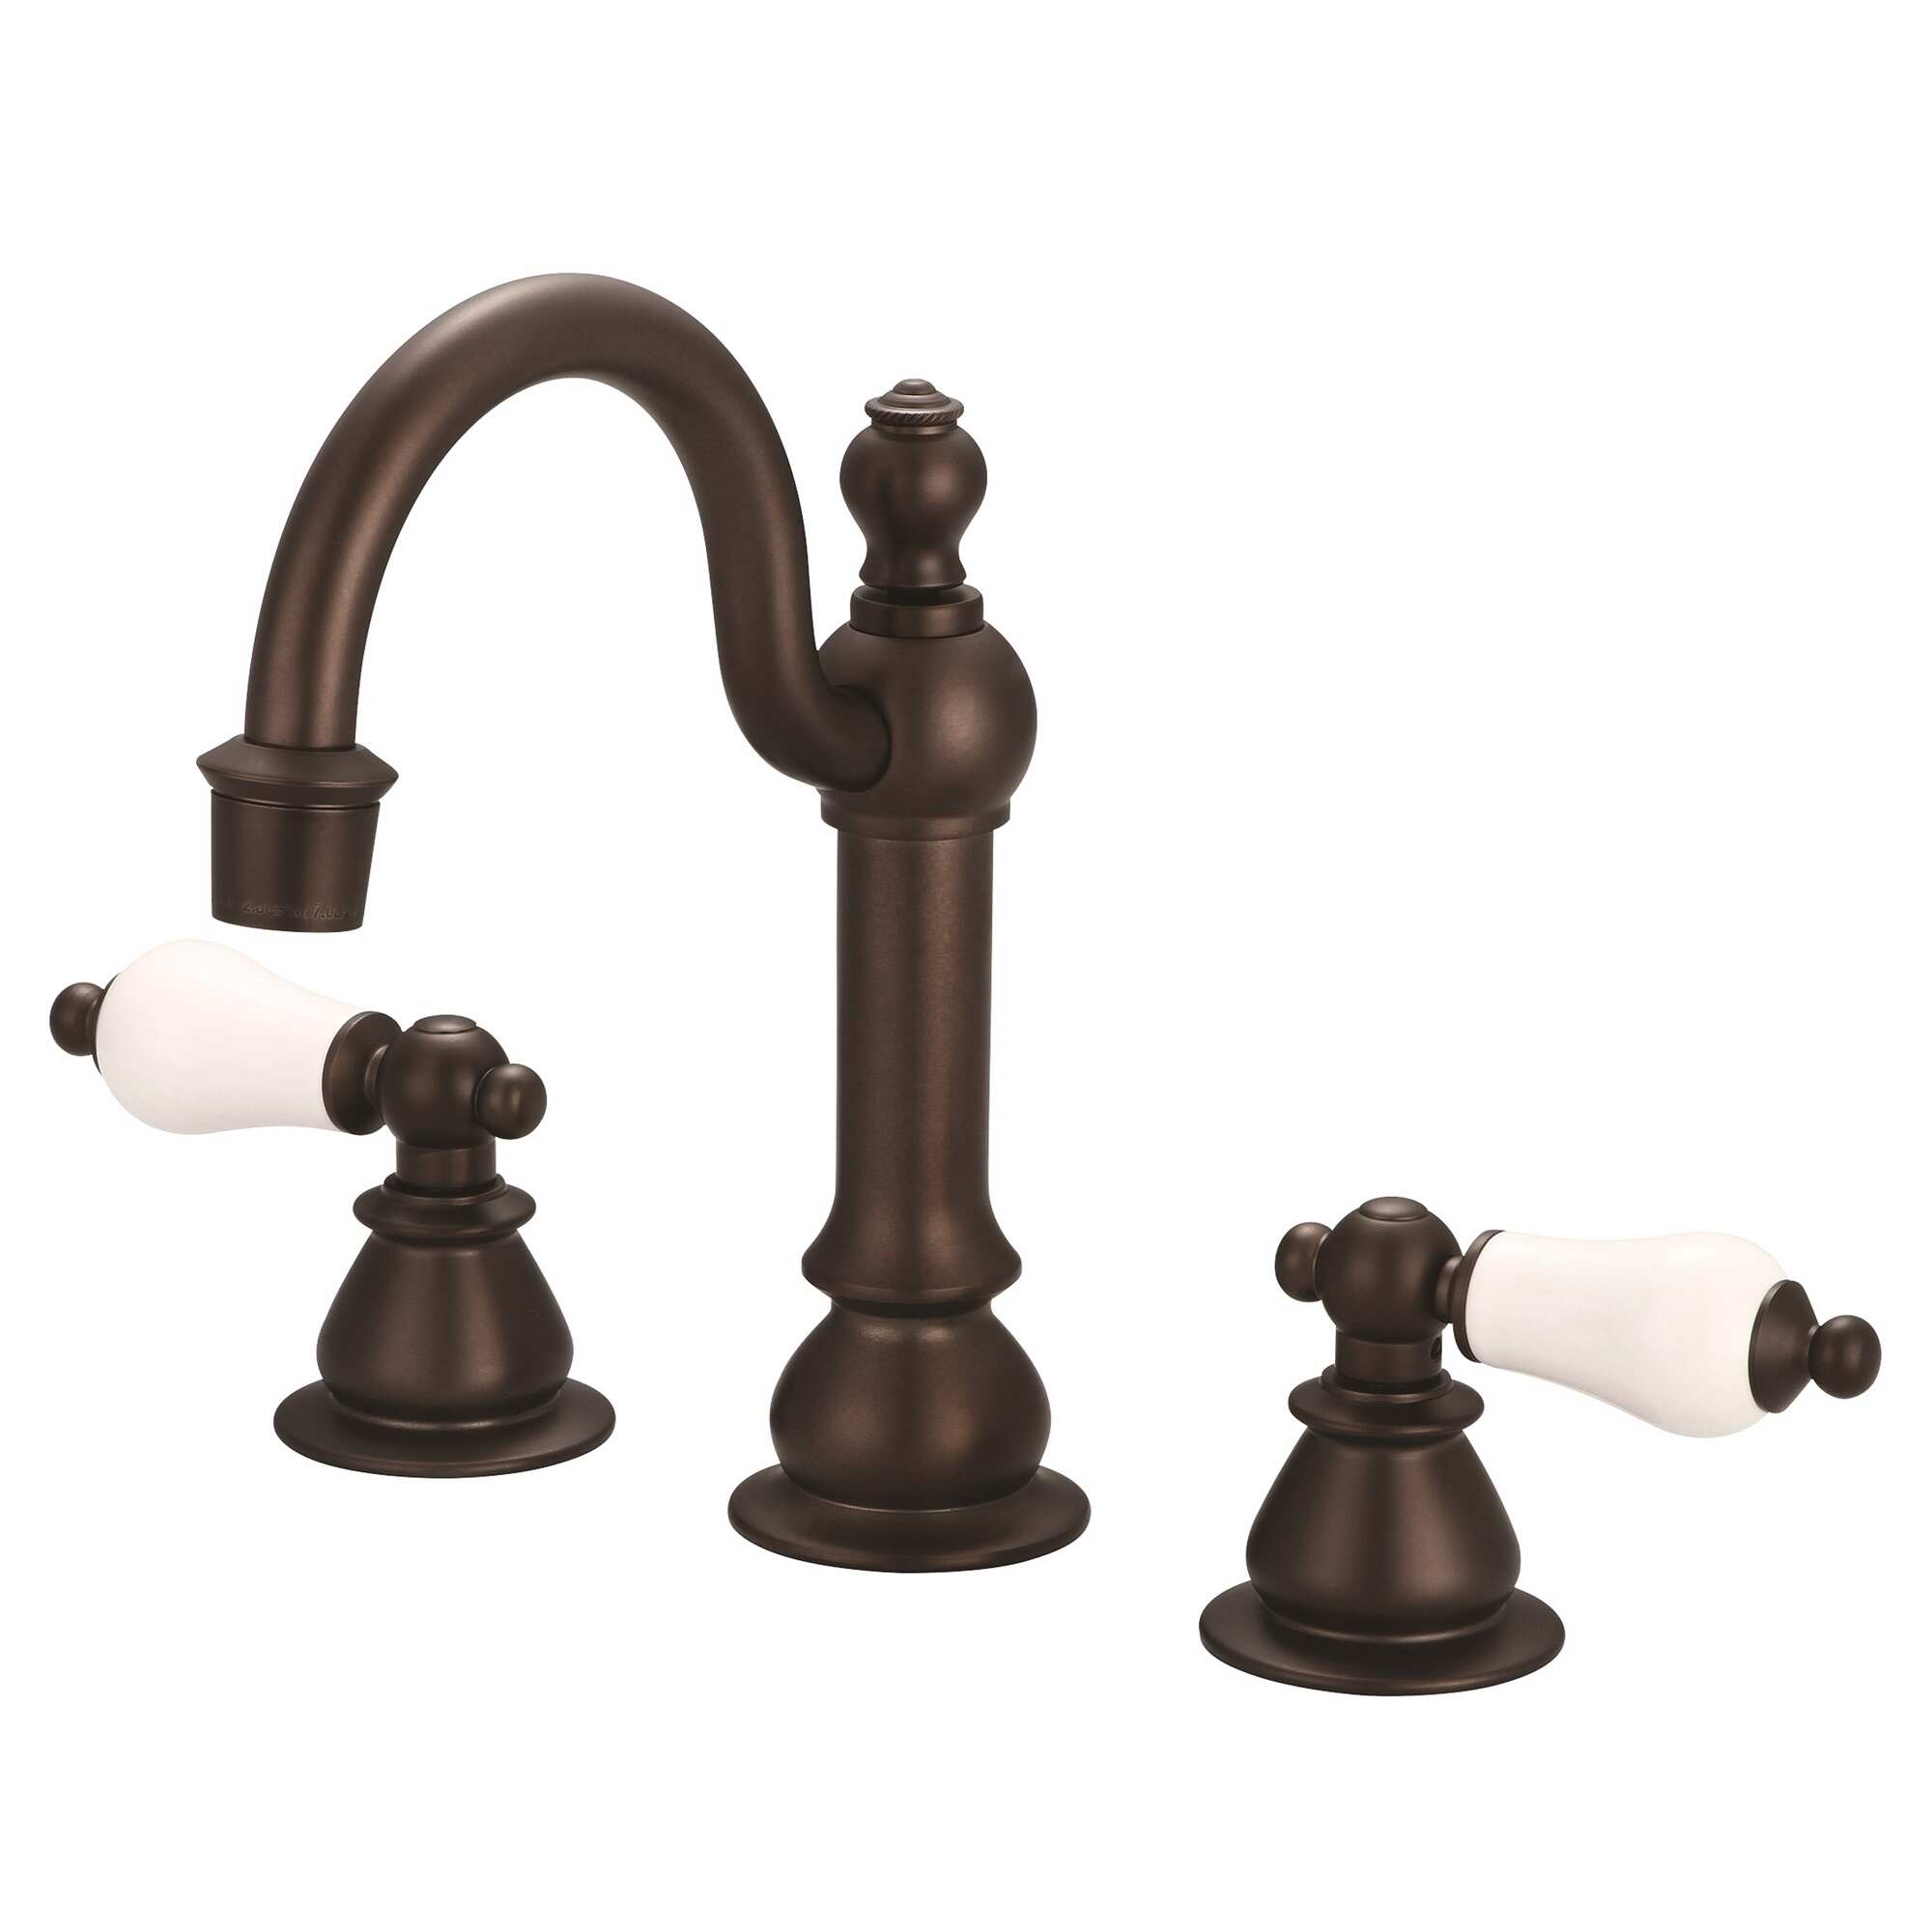 Widespread Lavatory Faucets With Pop-Up Drain in Oil-rubbed Bronze Finish With Metal Lever Handles